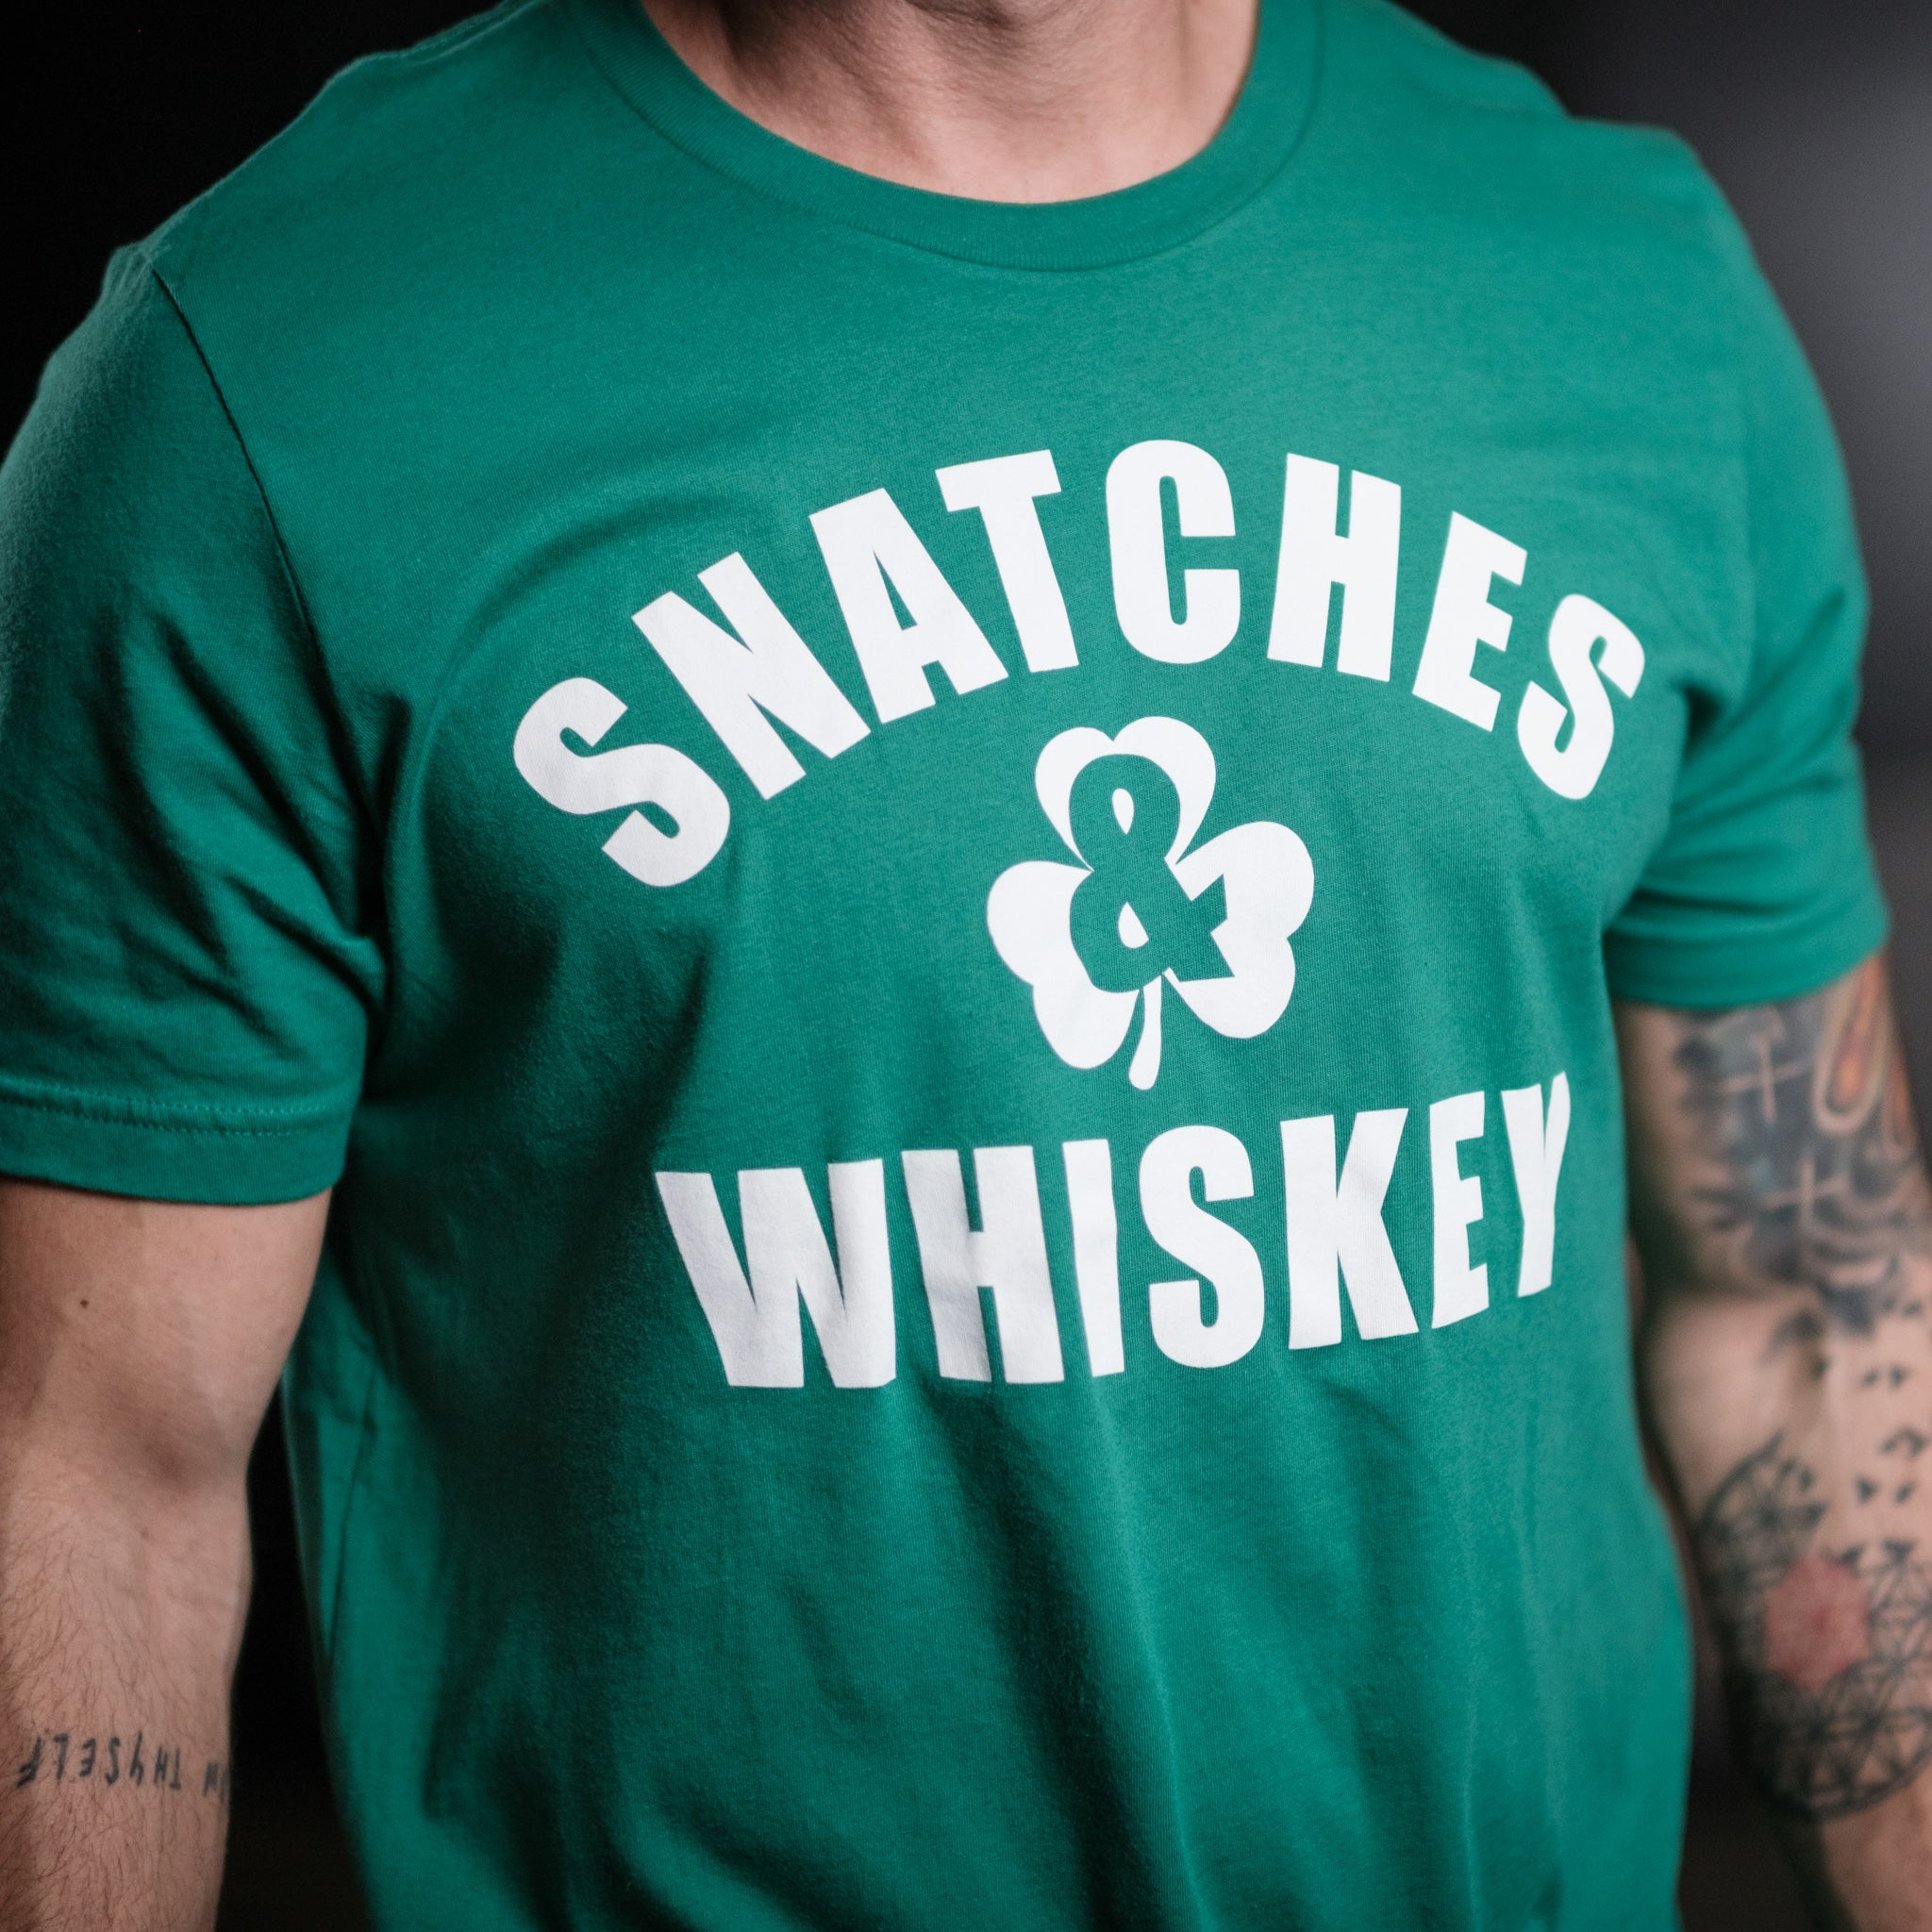 Snatches & Whiskey - Tee